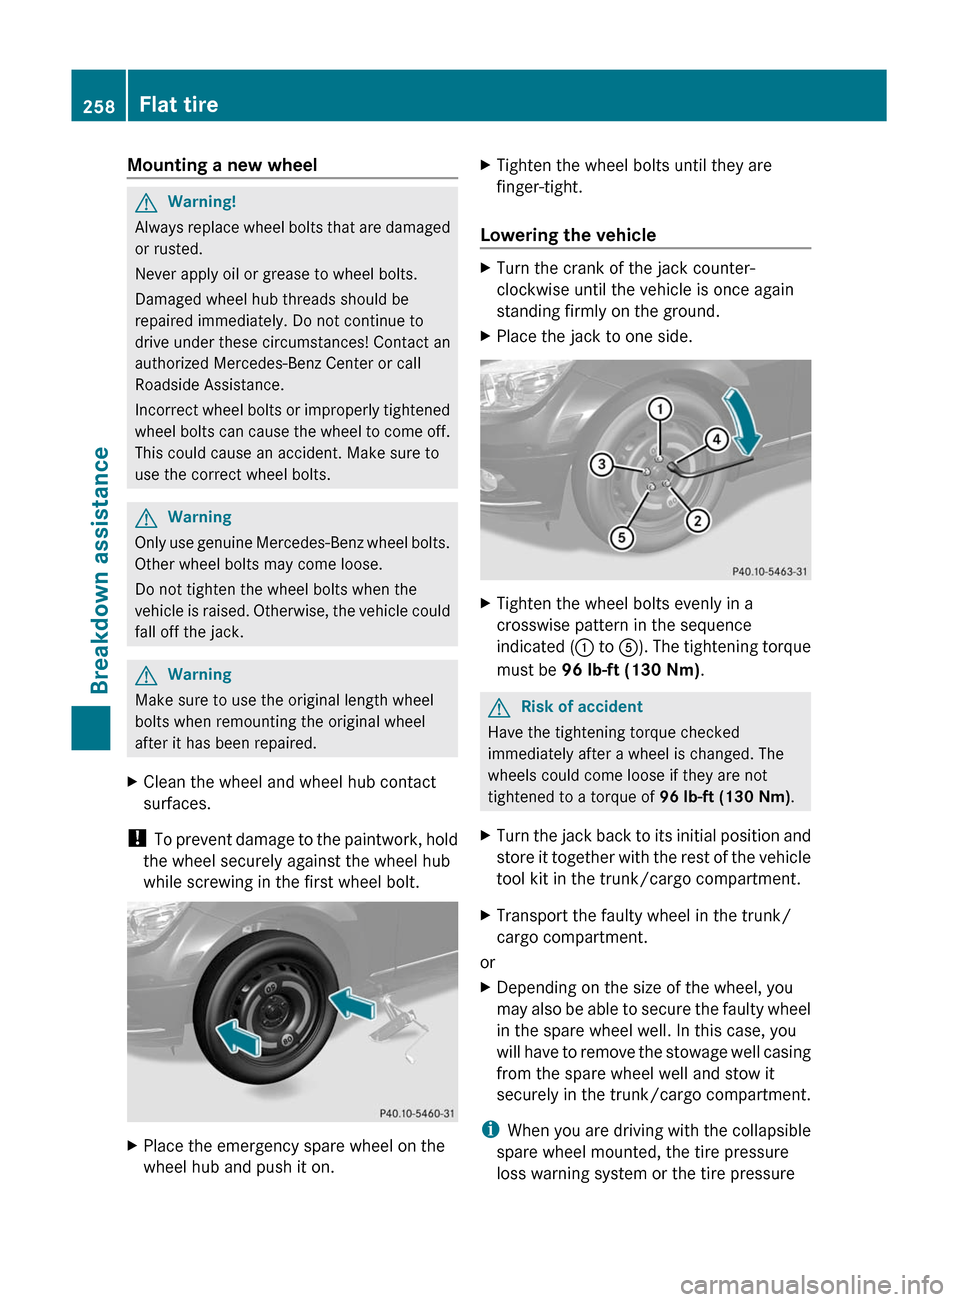 MERCEDES-BENZ C-Class 2011 W204 User Guide Mounting a new wheelGWarning!
Always replace wheel bolts that are damaged
or rusted.
Never apply oil or grease to wheel bolts.
Damaged wheel hub threads should be
repaired immediately. Do not continue